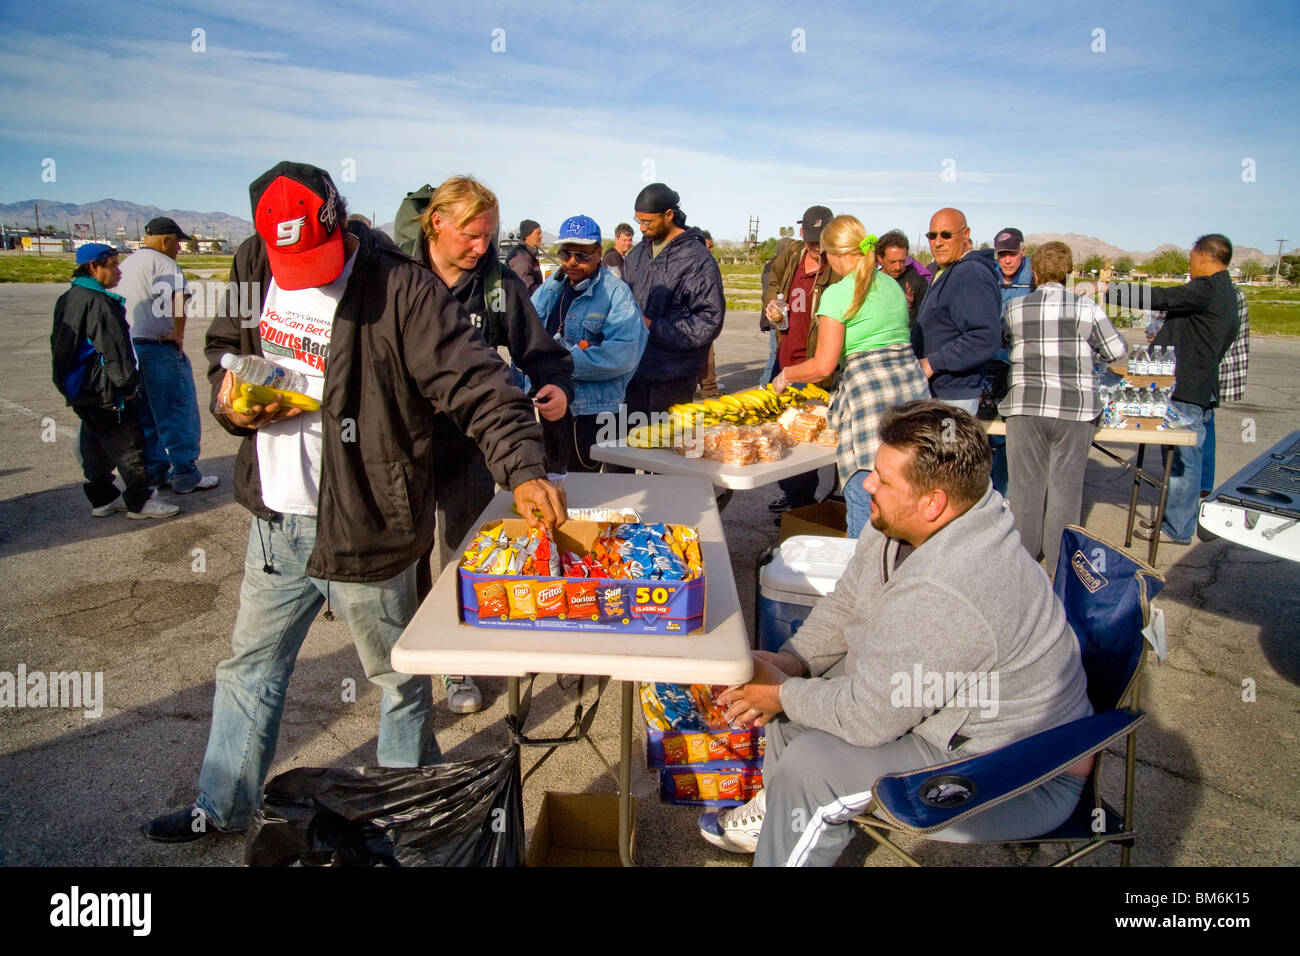 Homeless Men Line Up For Free Food Supplied By A Local Church In A Vacant Lot In North Las Vegas Nevada Note Serving Volunteer Stock Photo Alamy